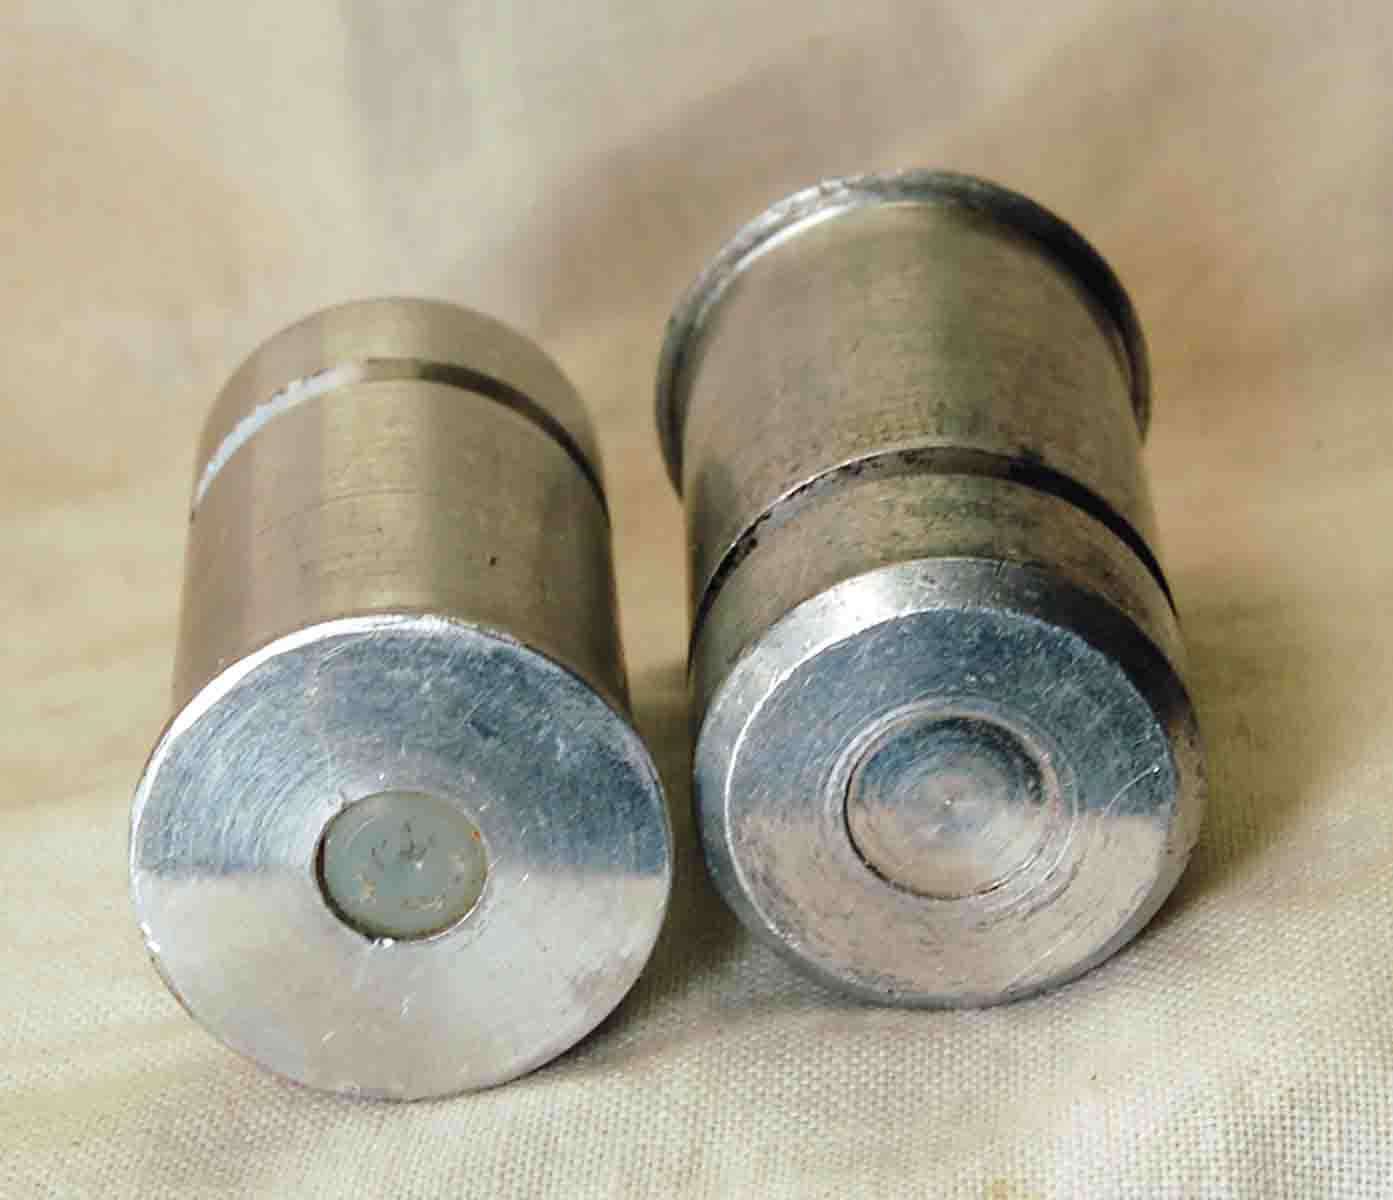 A pair of commercial snap caps with a nylon “primer” (left) and plugged end containing a spring (right).